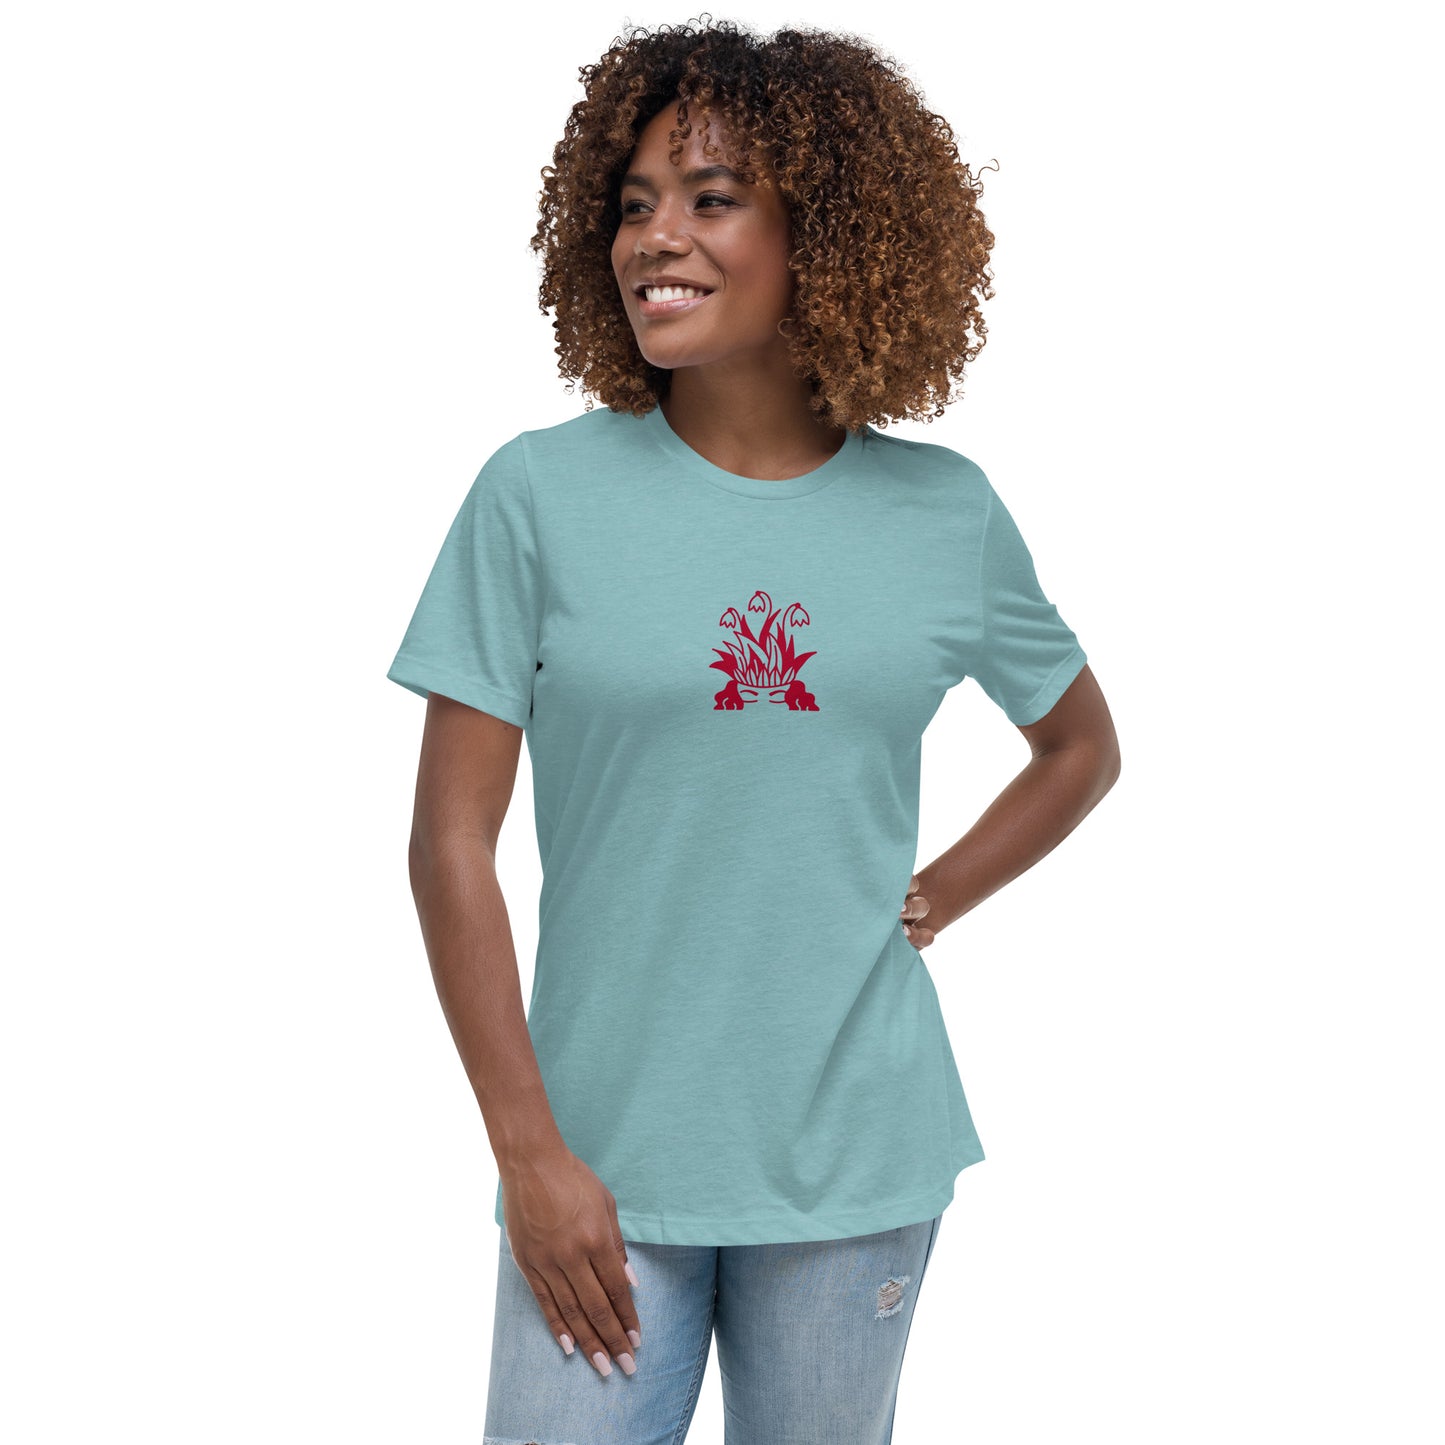 Adonis-Creations - Women's Relaxed Mindfulness T-Shirt